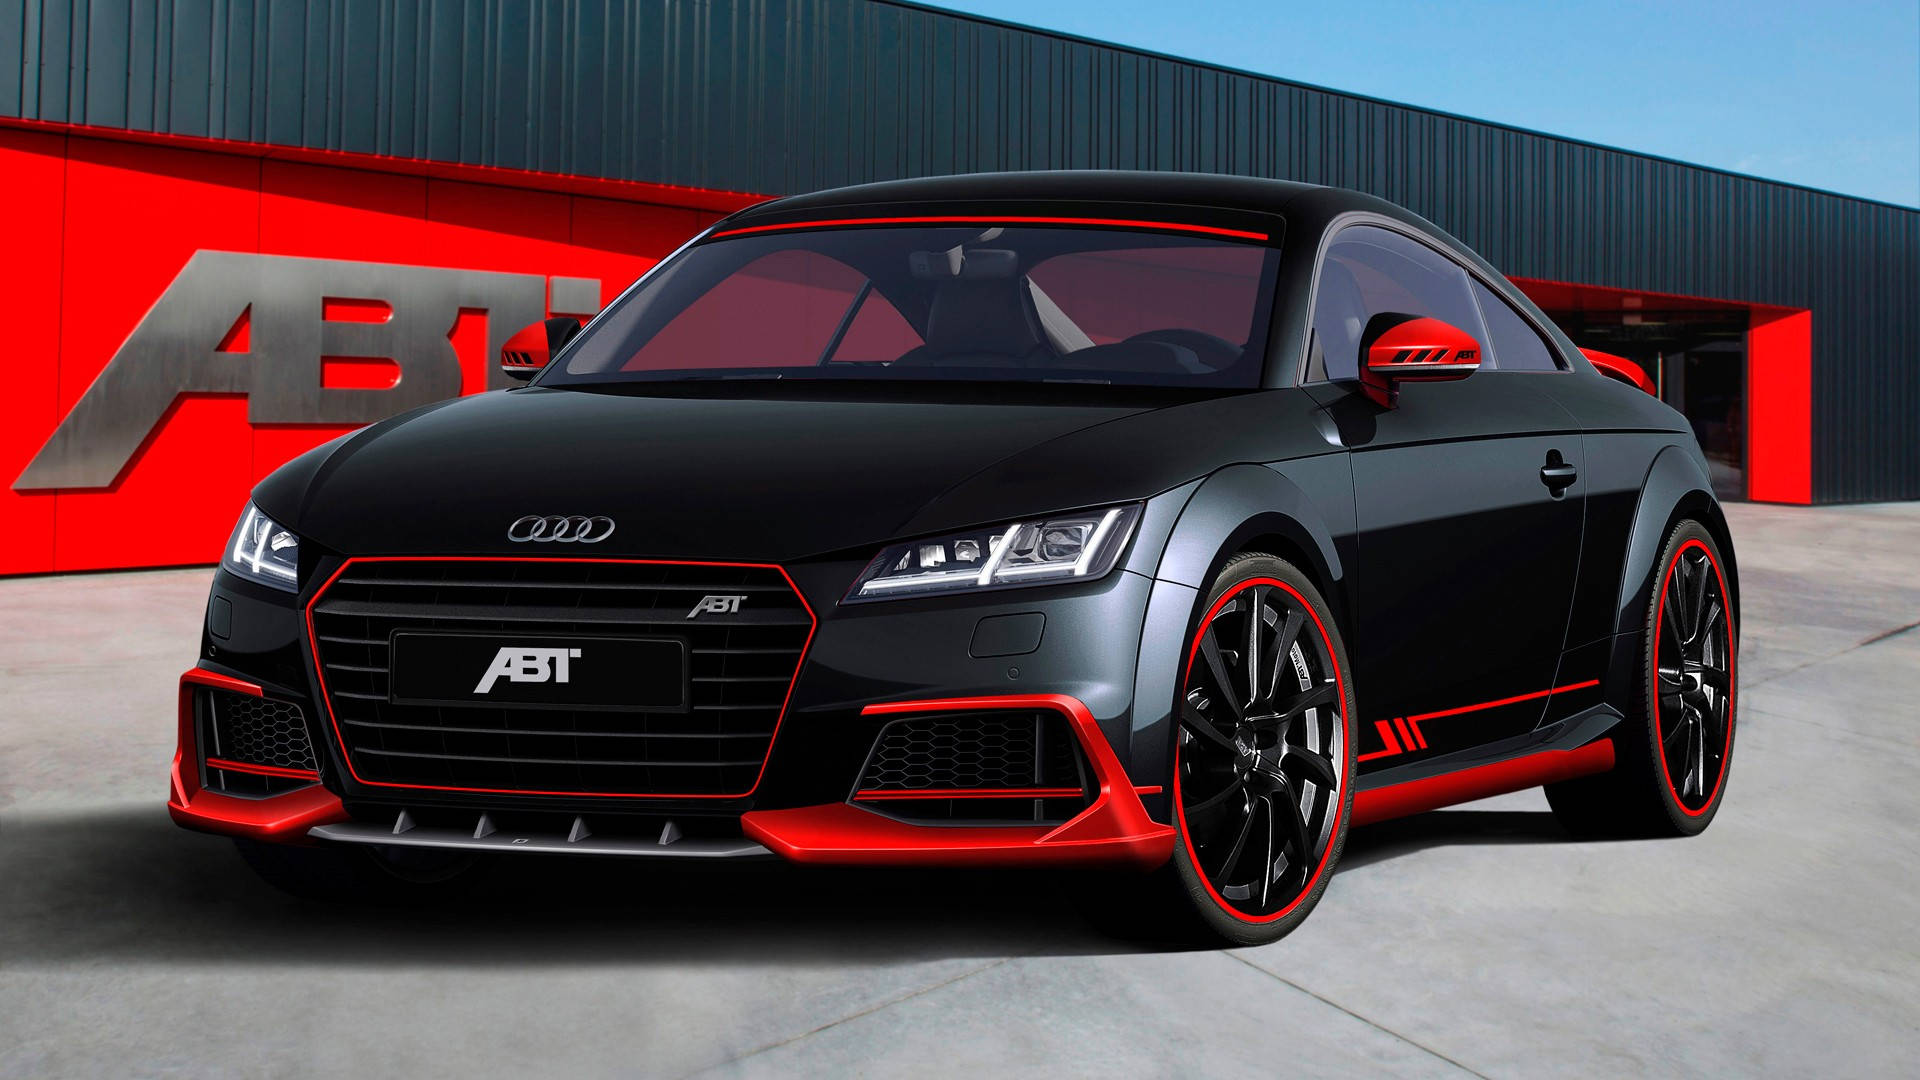 Stunning Black And Red Audi R8 Showcasing Power And Elegance Background